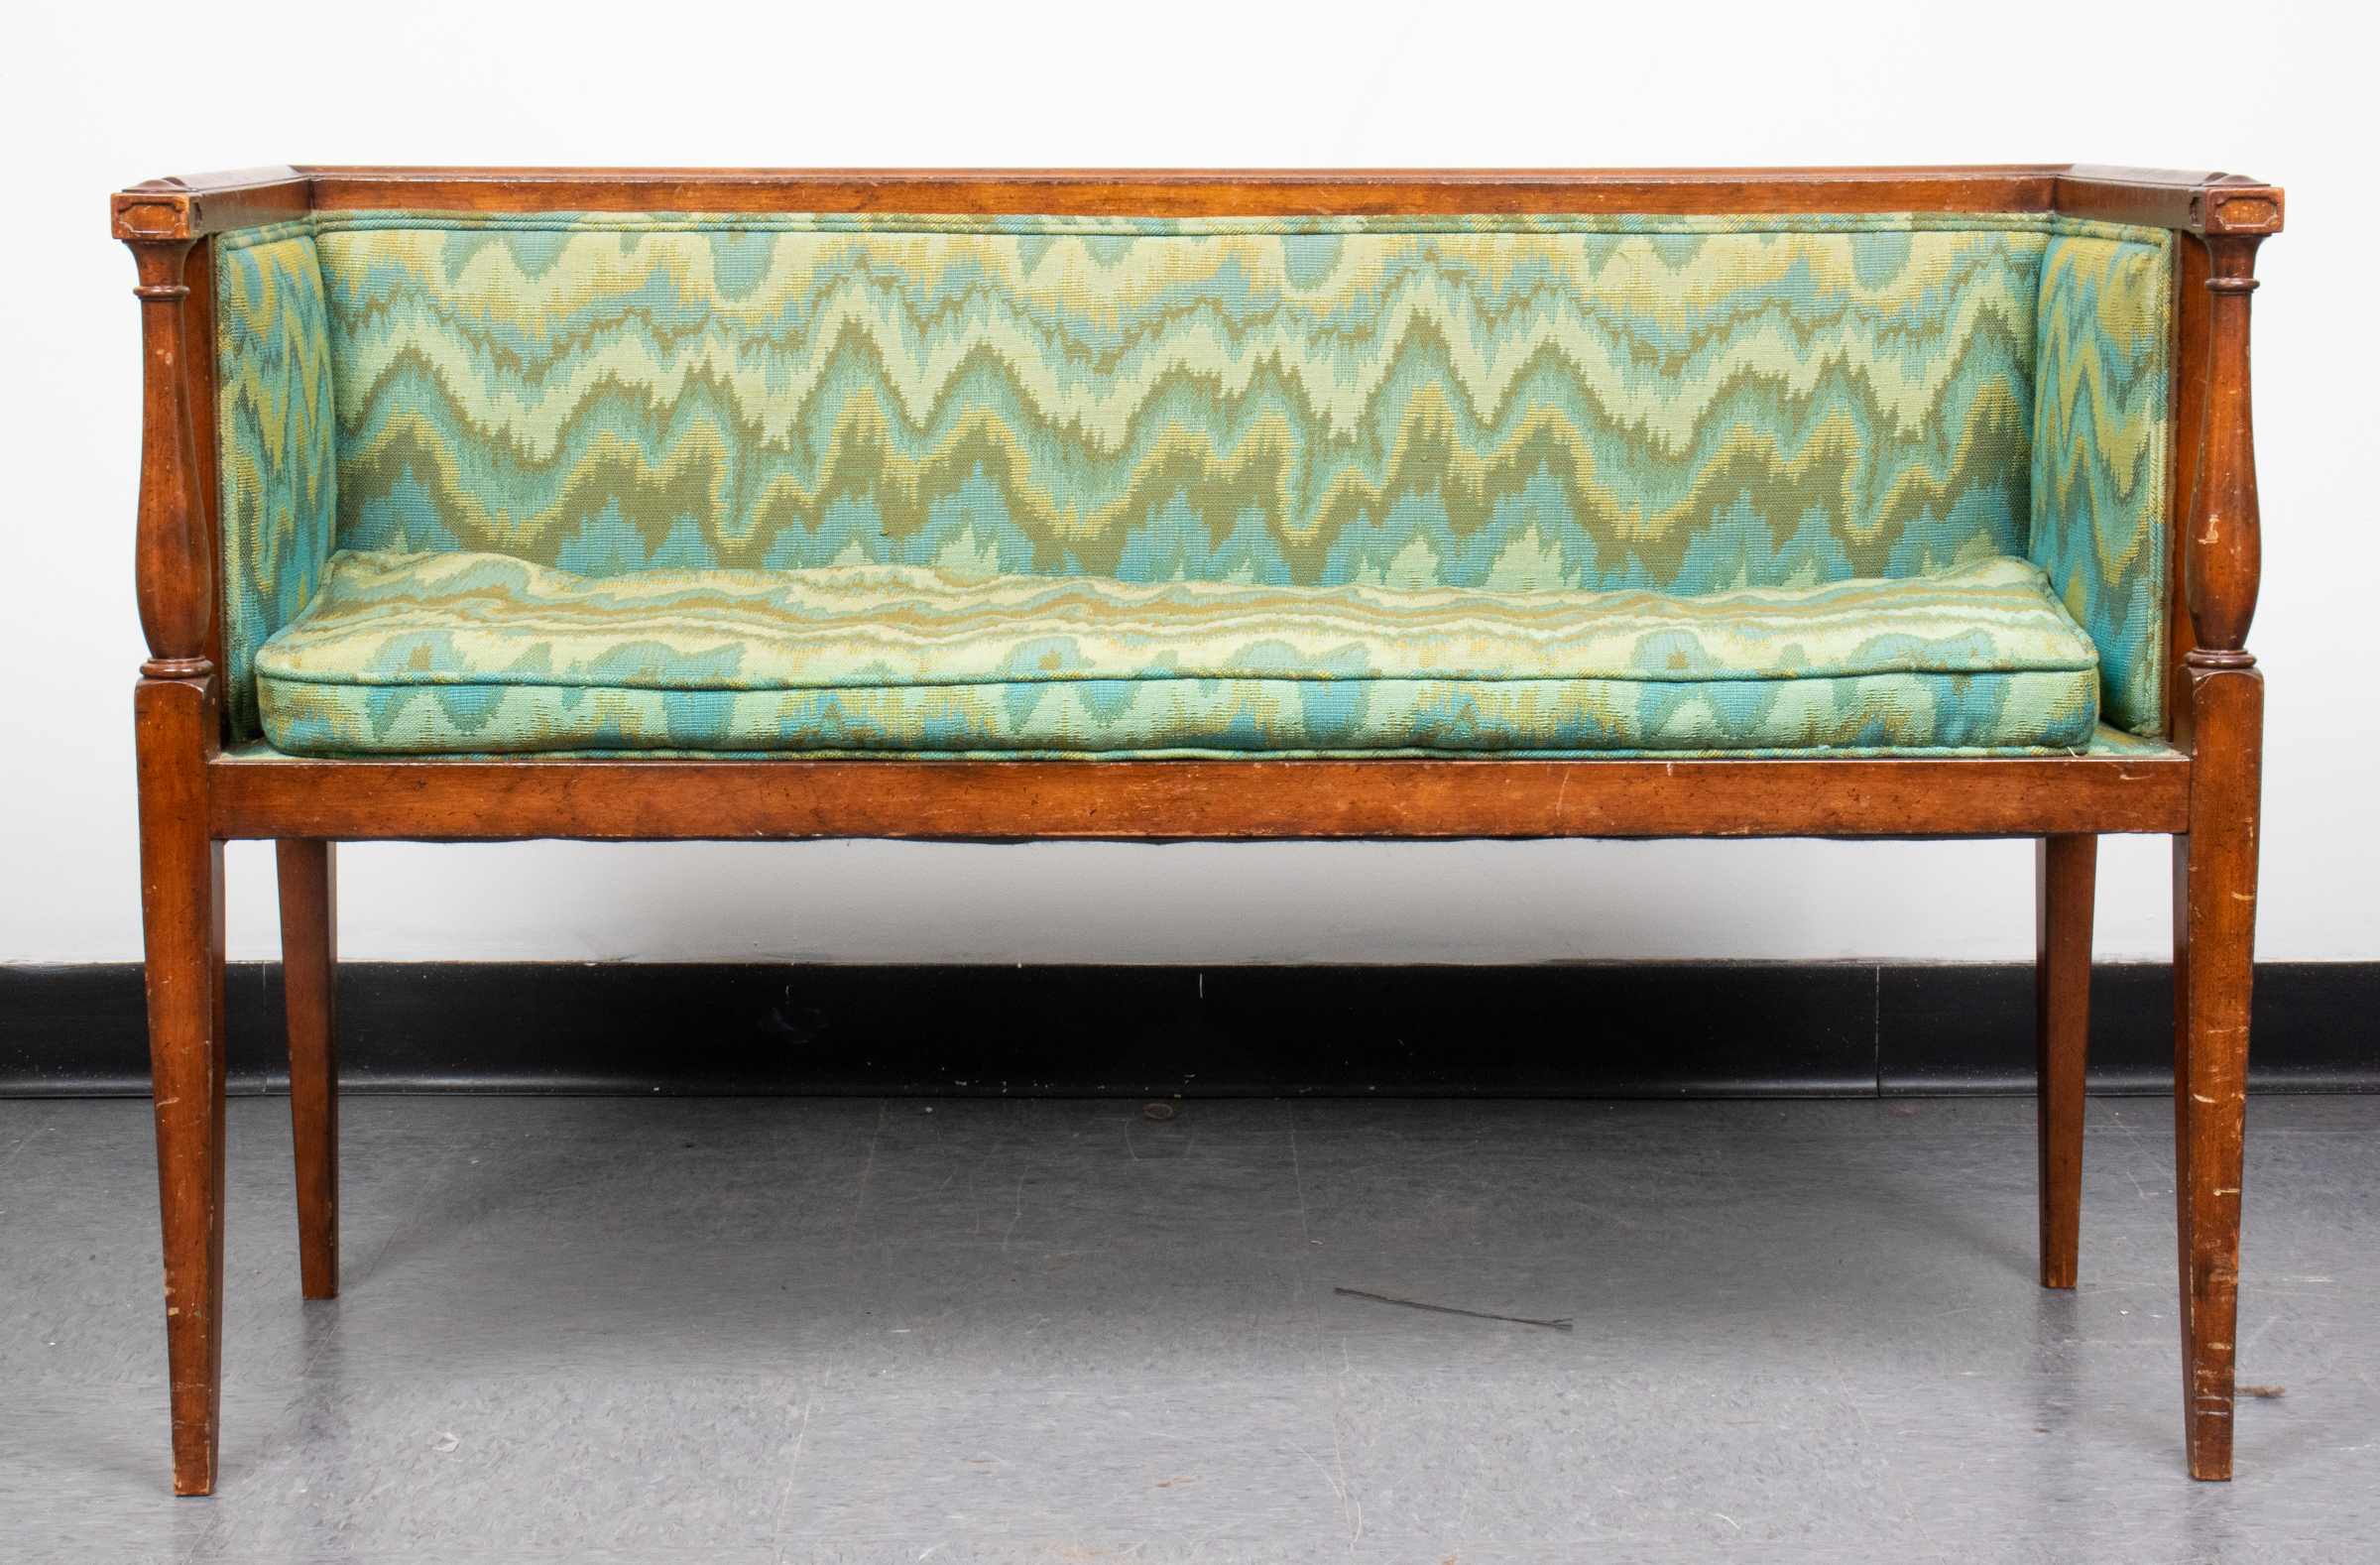 FEDERAL STYLE FLAME STITCH UPHOLSTERED 3c2f7b